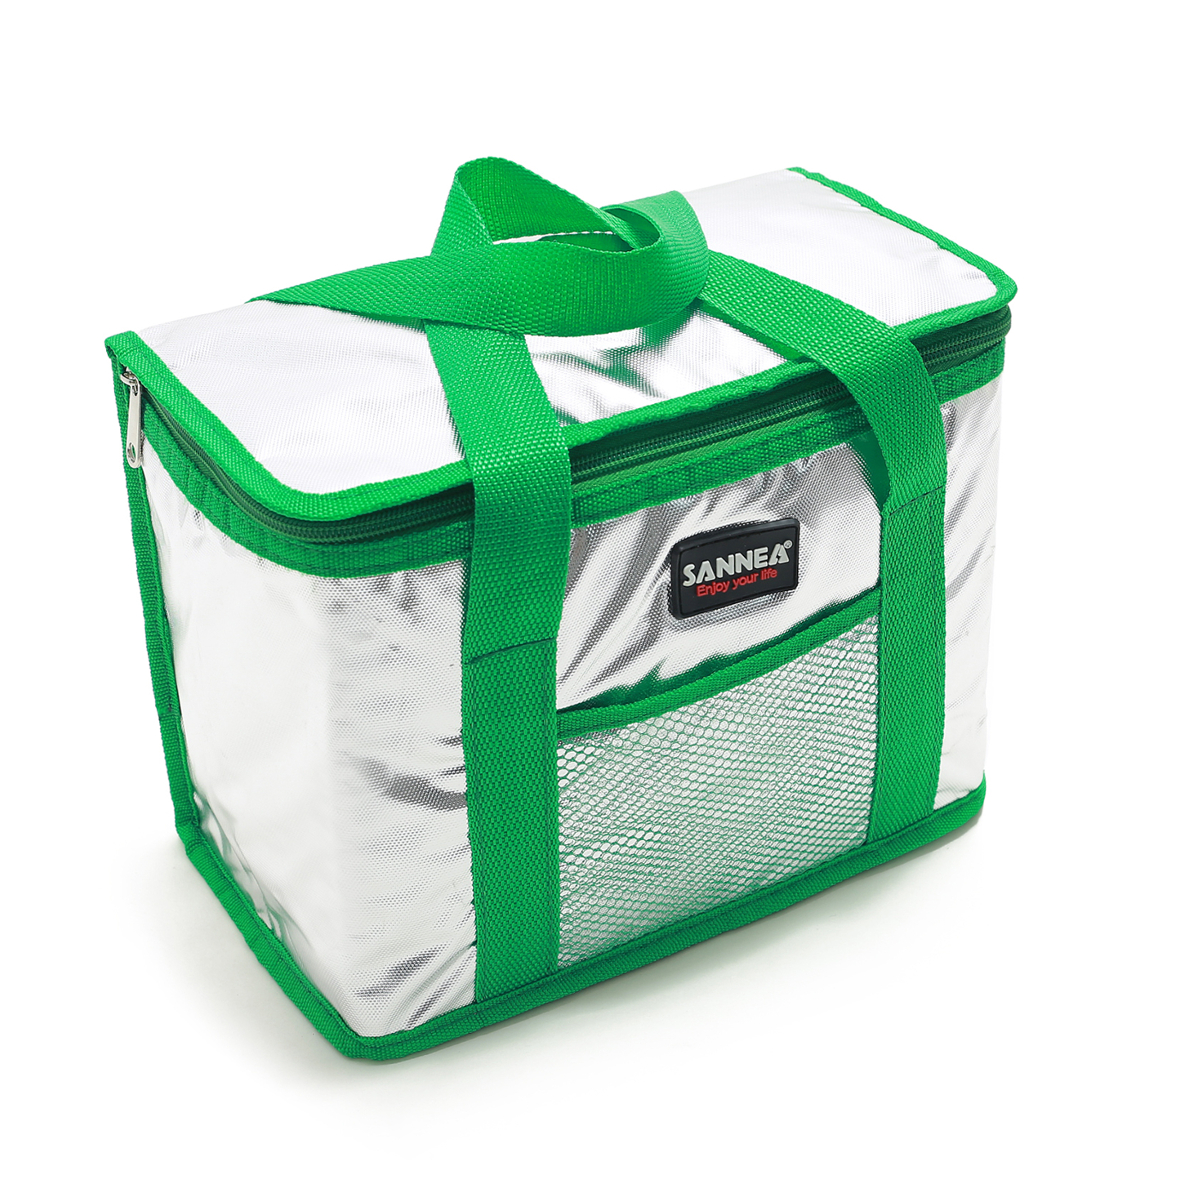 81626L-Picnic-Bag-Food-Delivery-Insulated-Bag-Lunch-Box-Storage-Bag-Outdoor-Camping-Travel-1855998-9